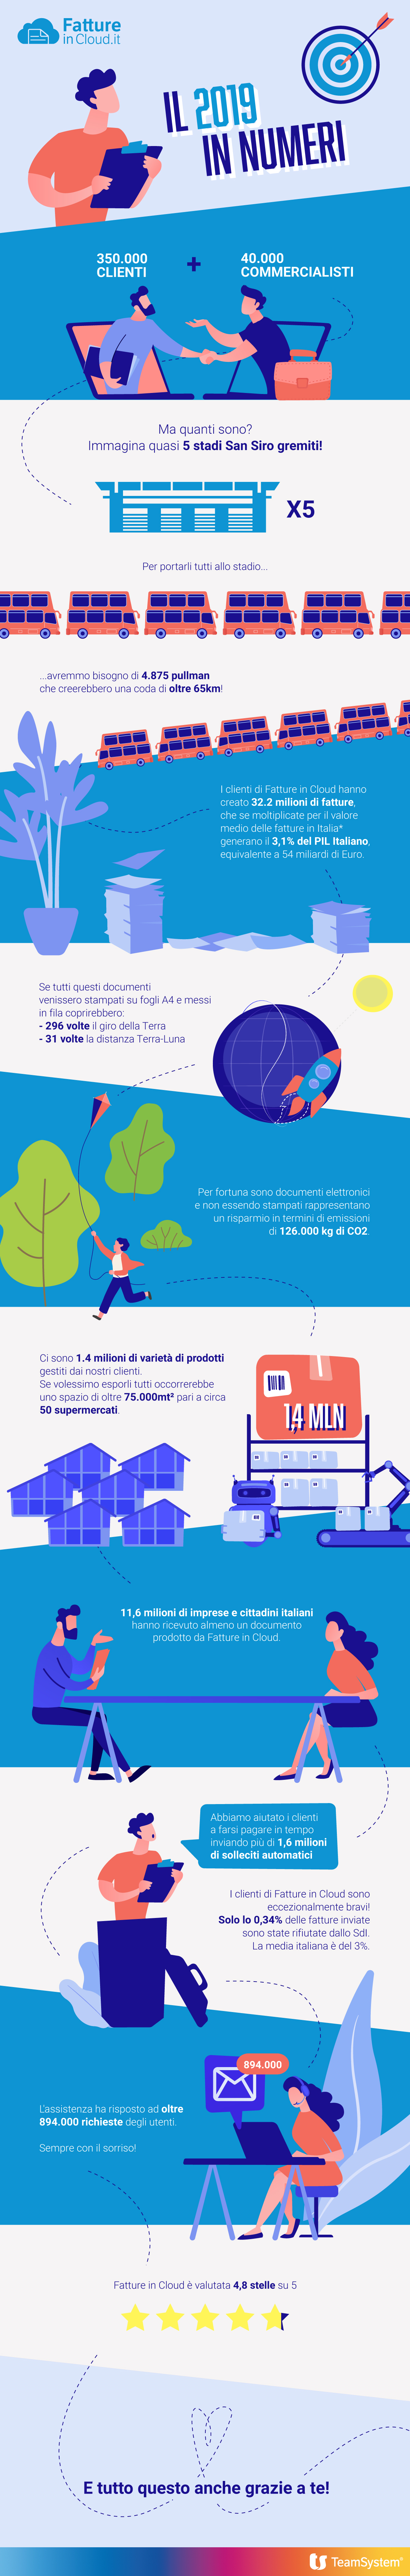 Fatture_In_Cloud_infographic-year-2019-DEF